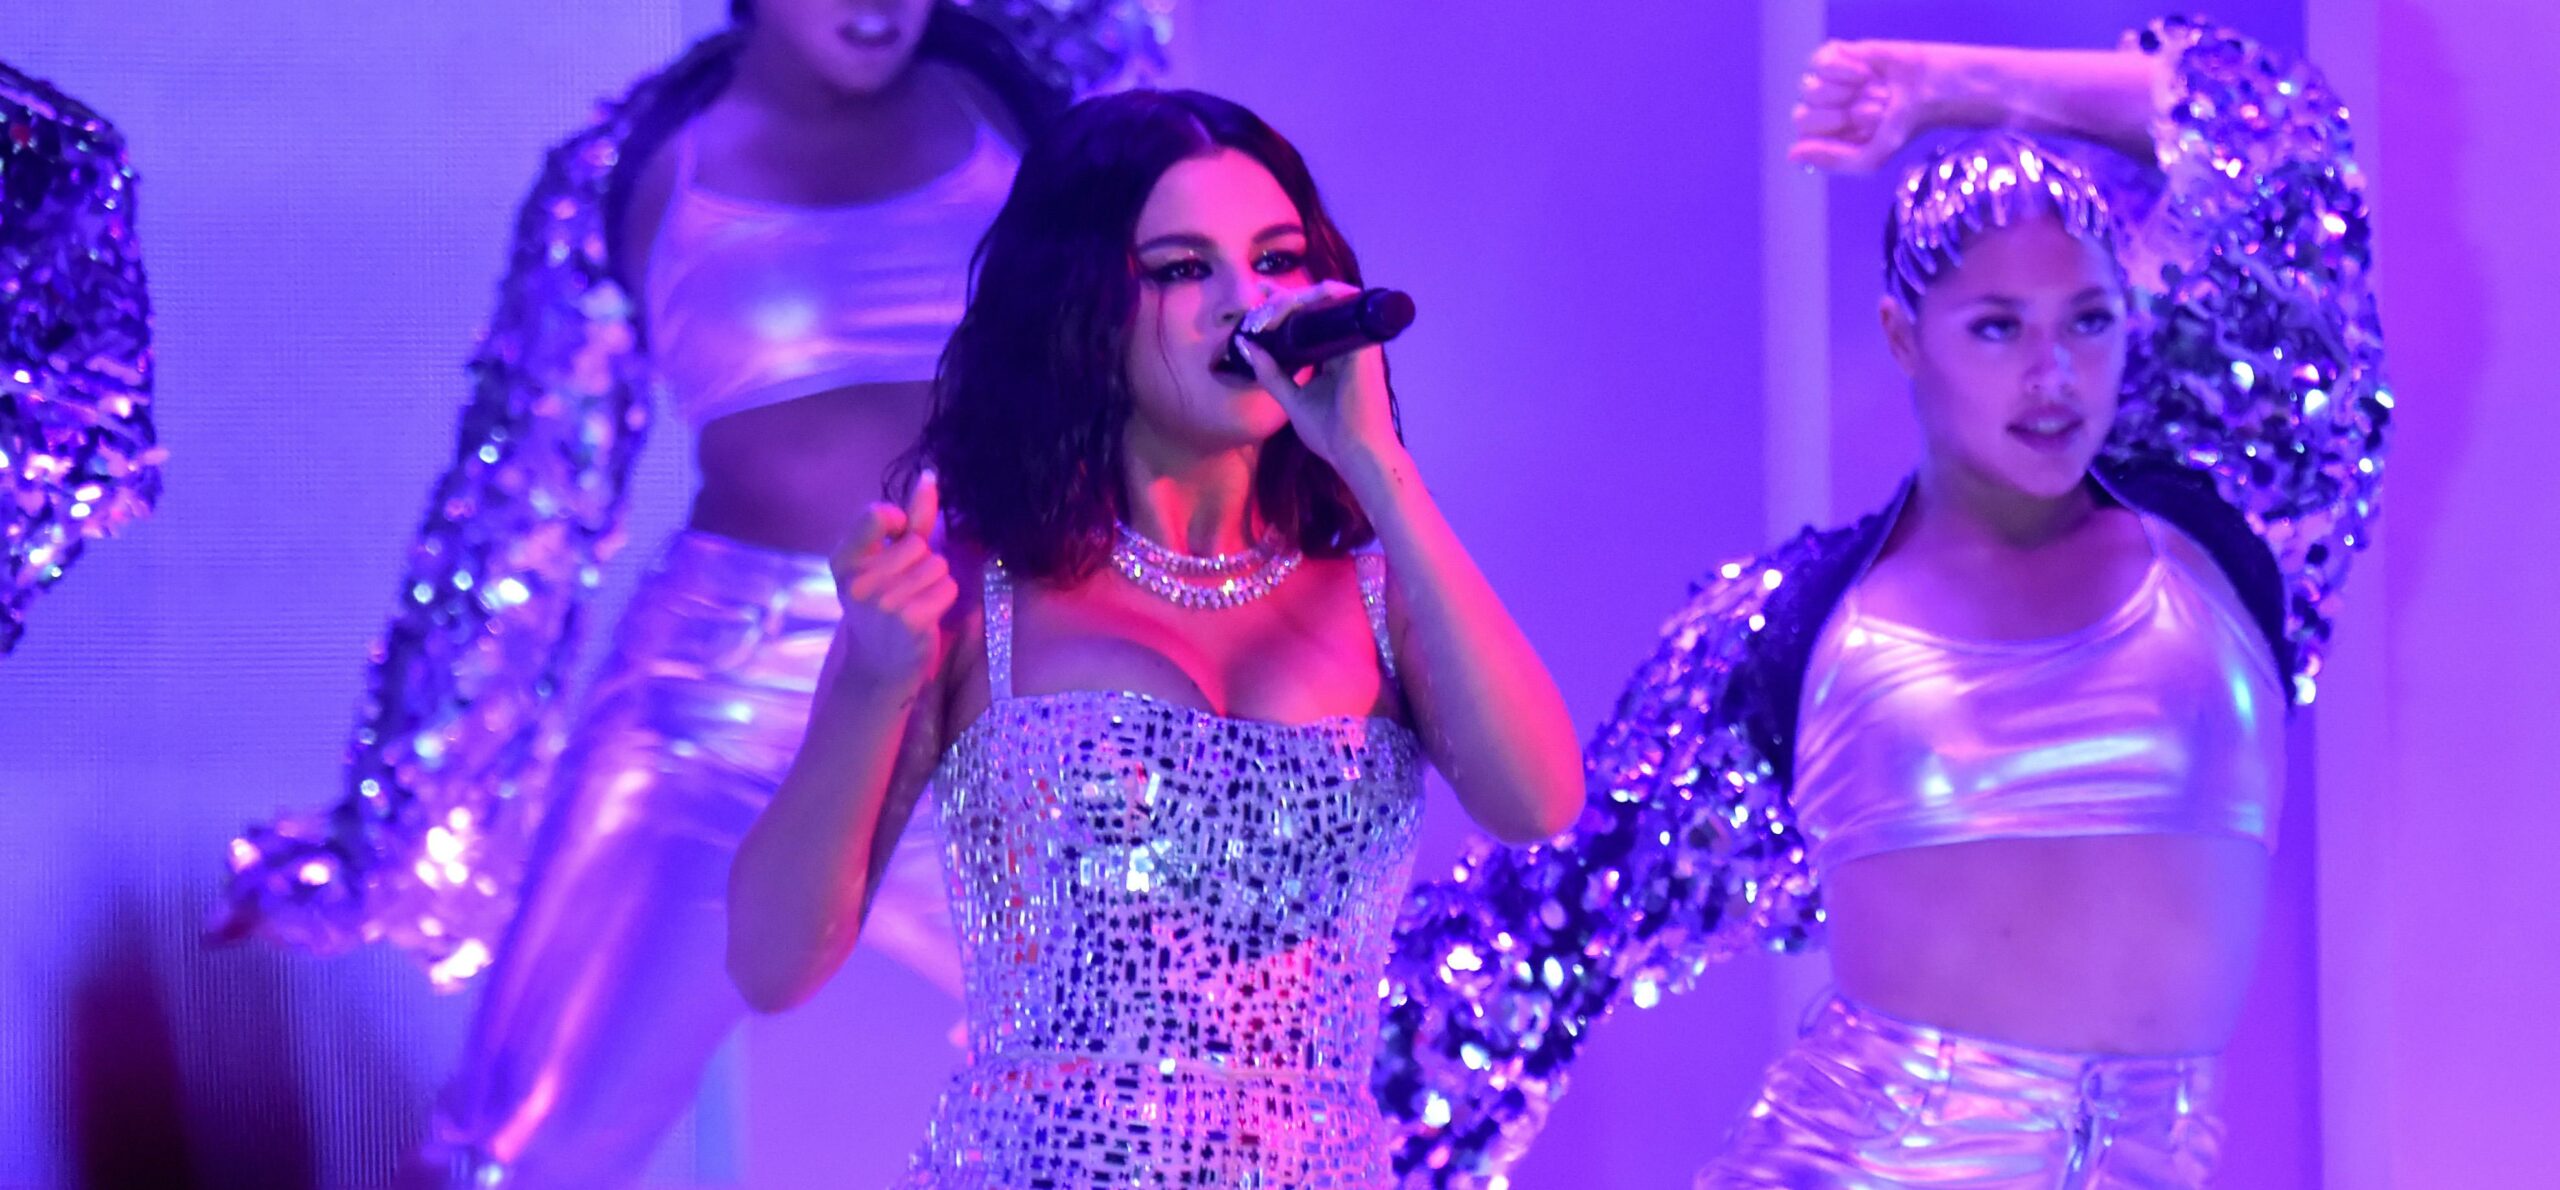 Can Selena Gomez Actually Sing? Her AMAs Performance Was a Little Shaky ...